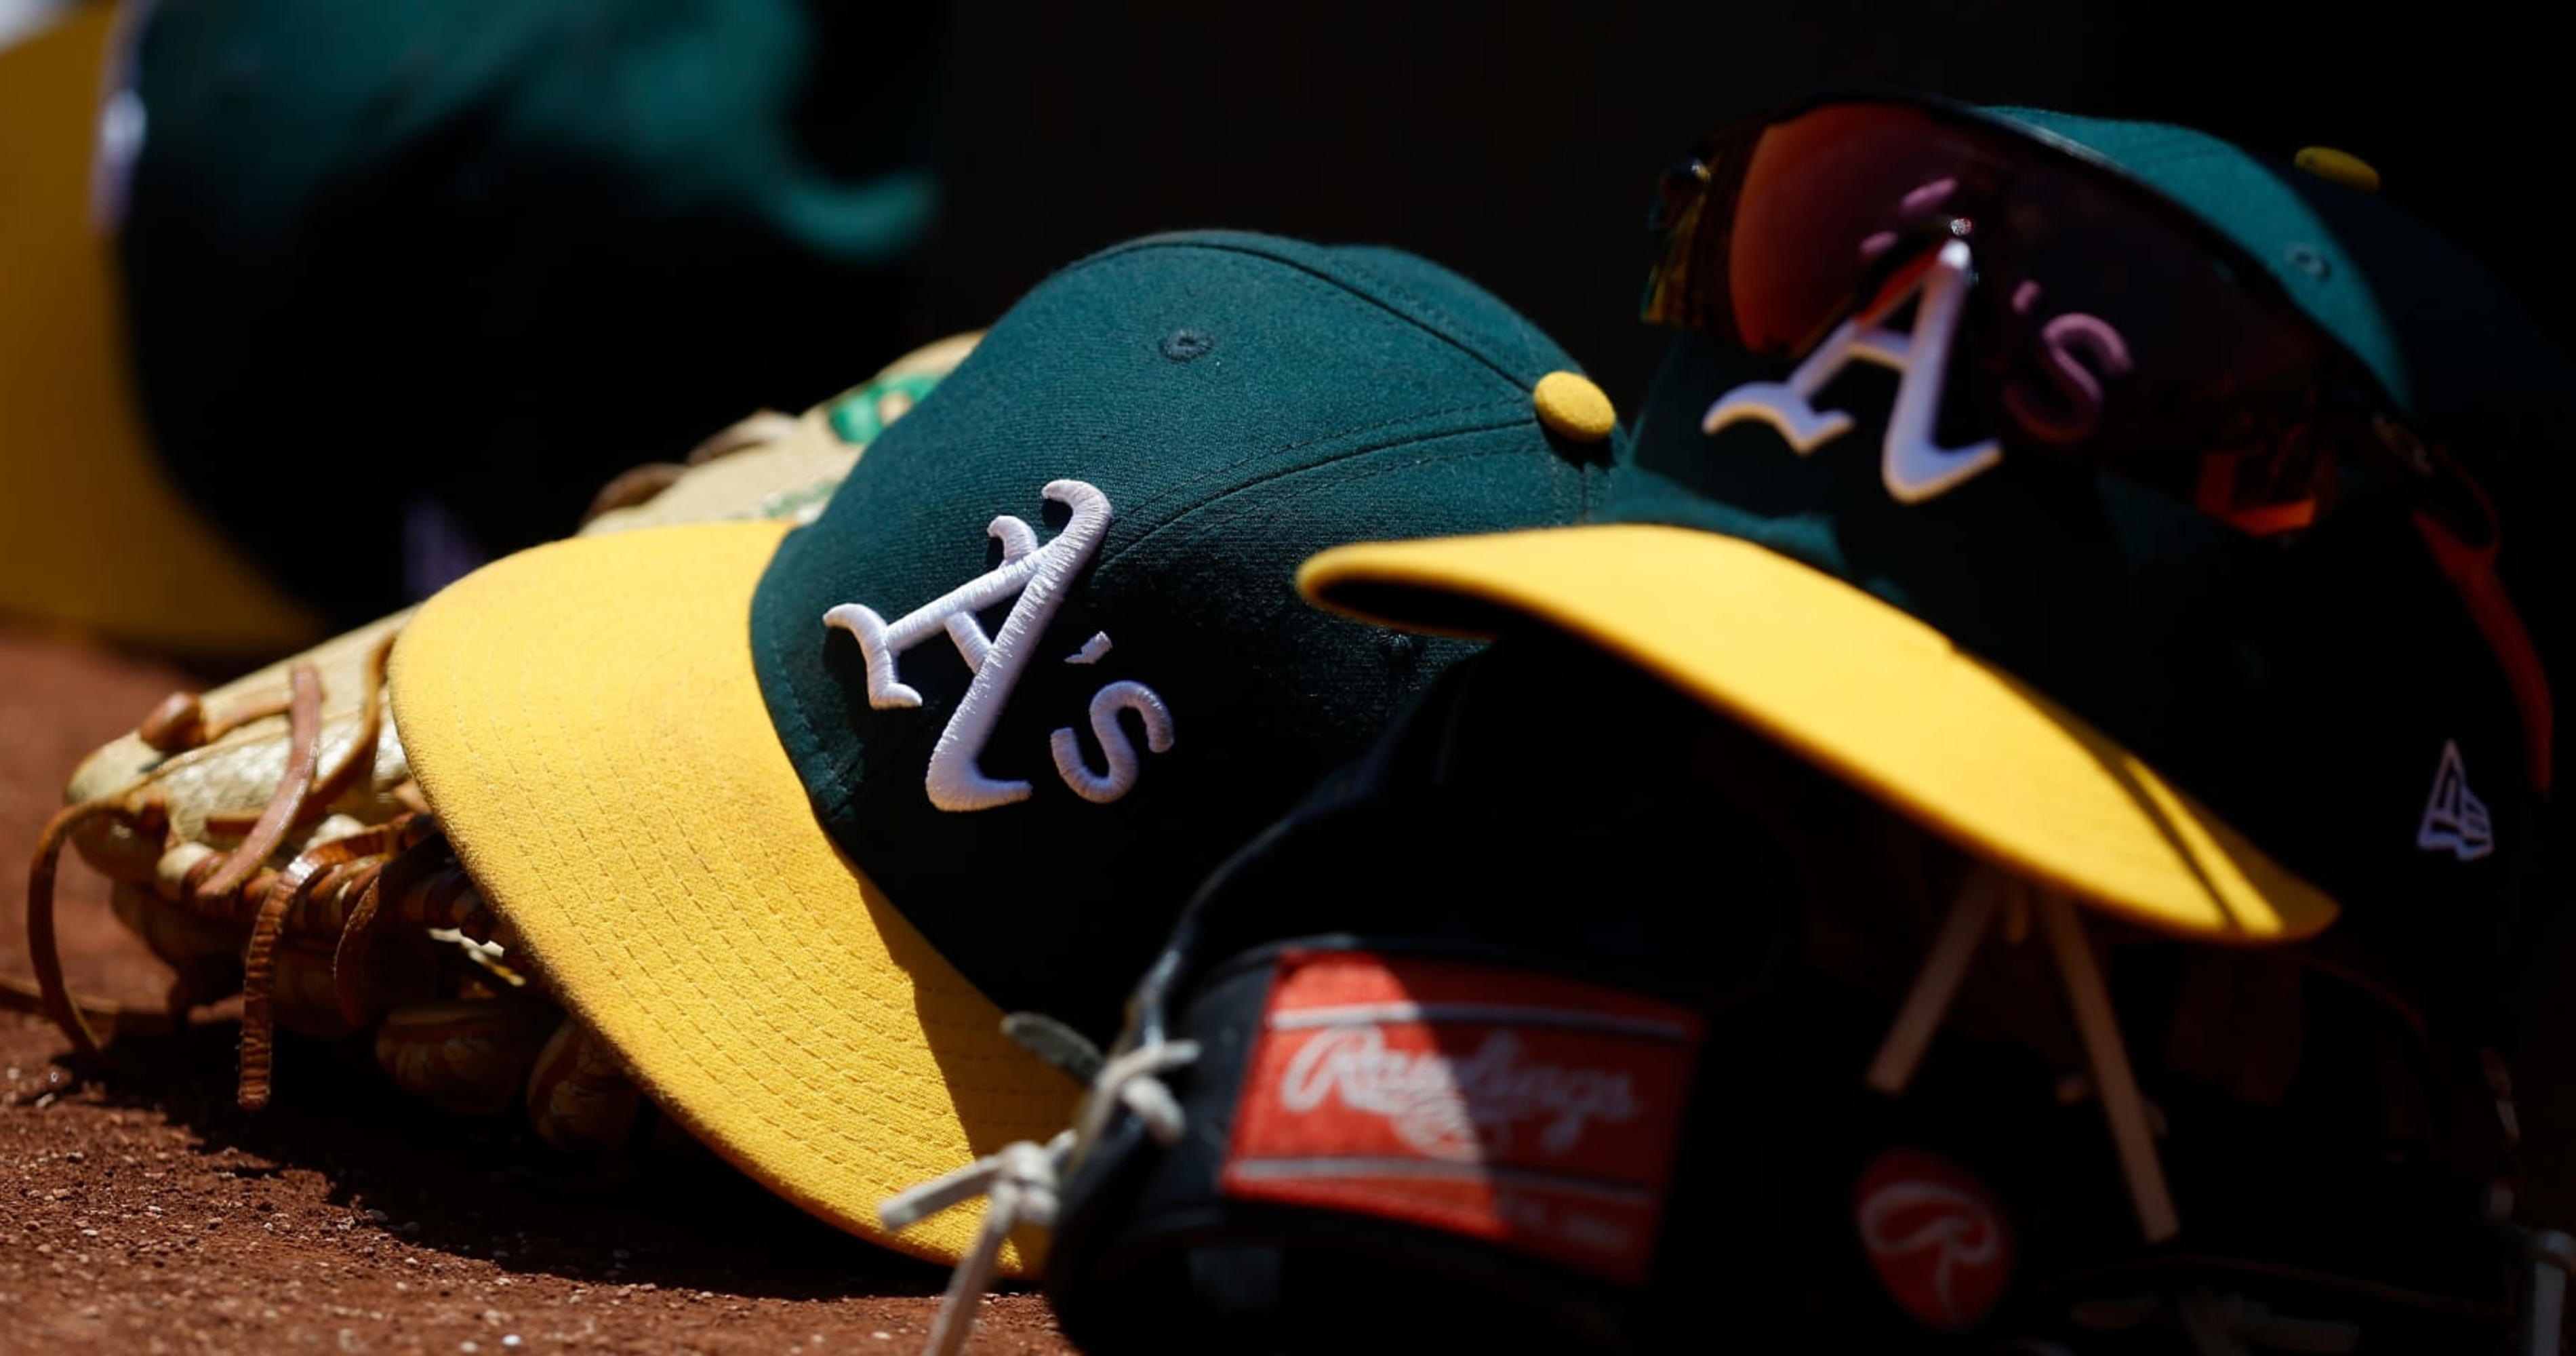 A's Fans Are Protesting, but Manfred Says Baseball Is Moving On